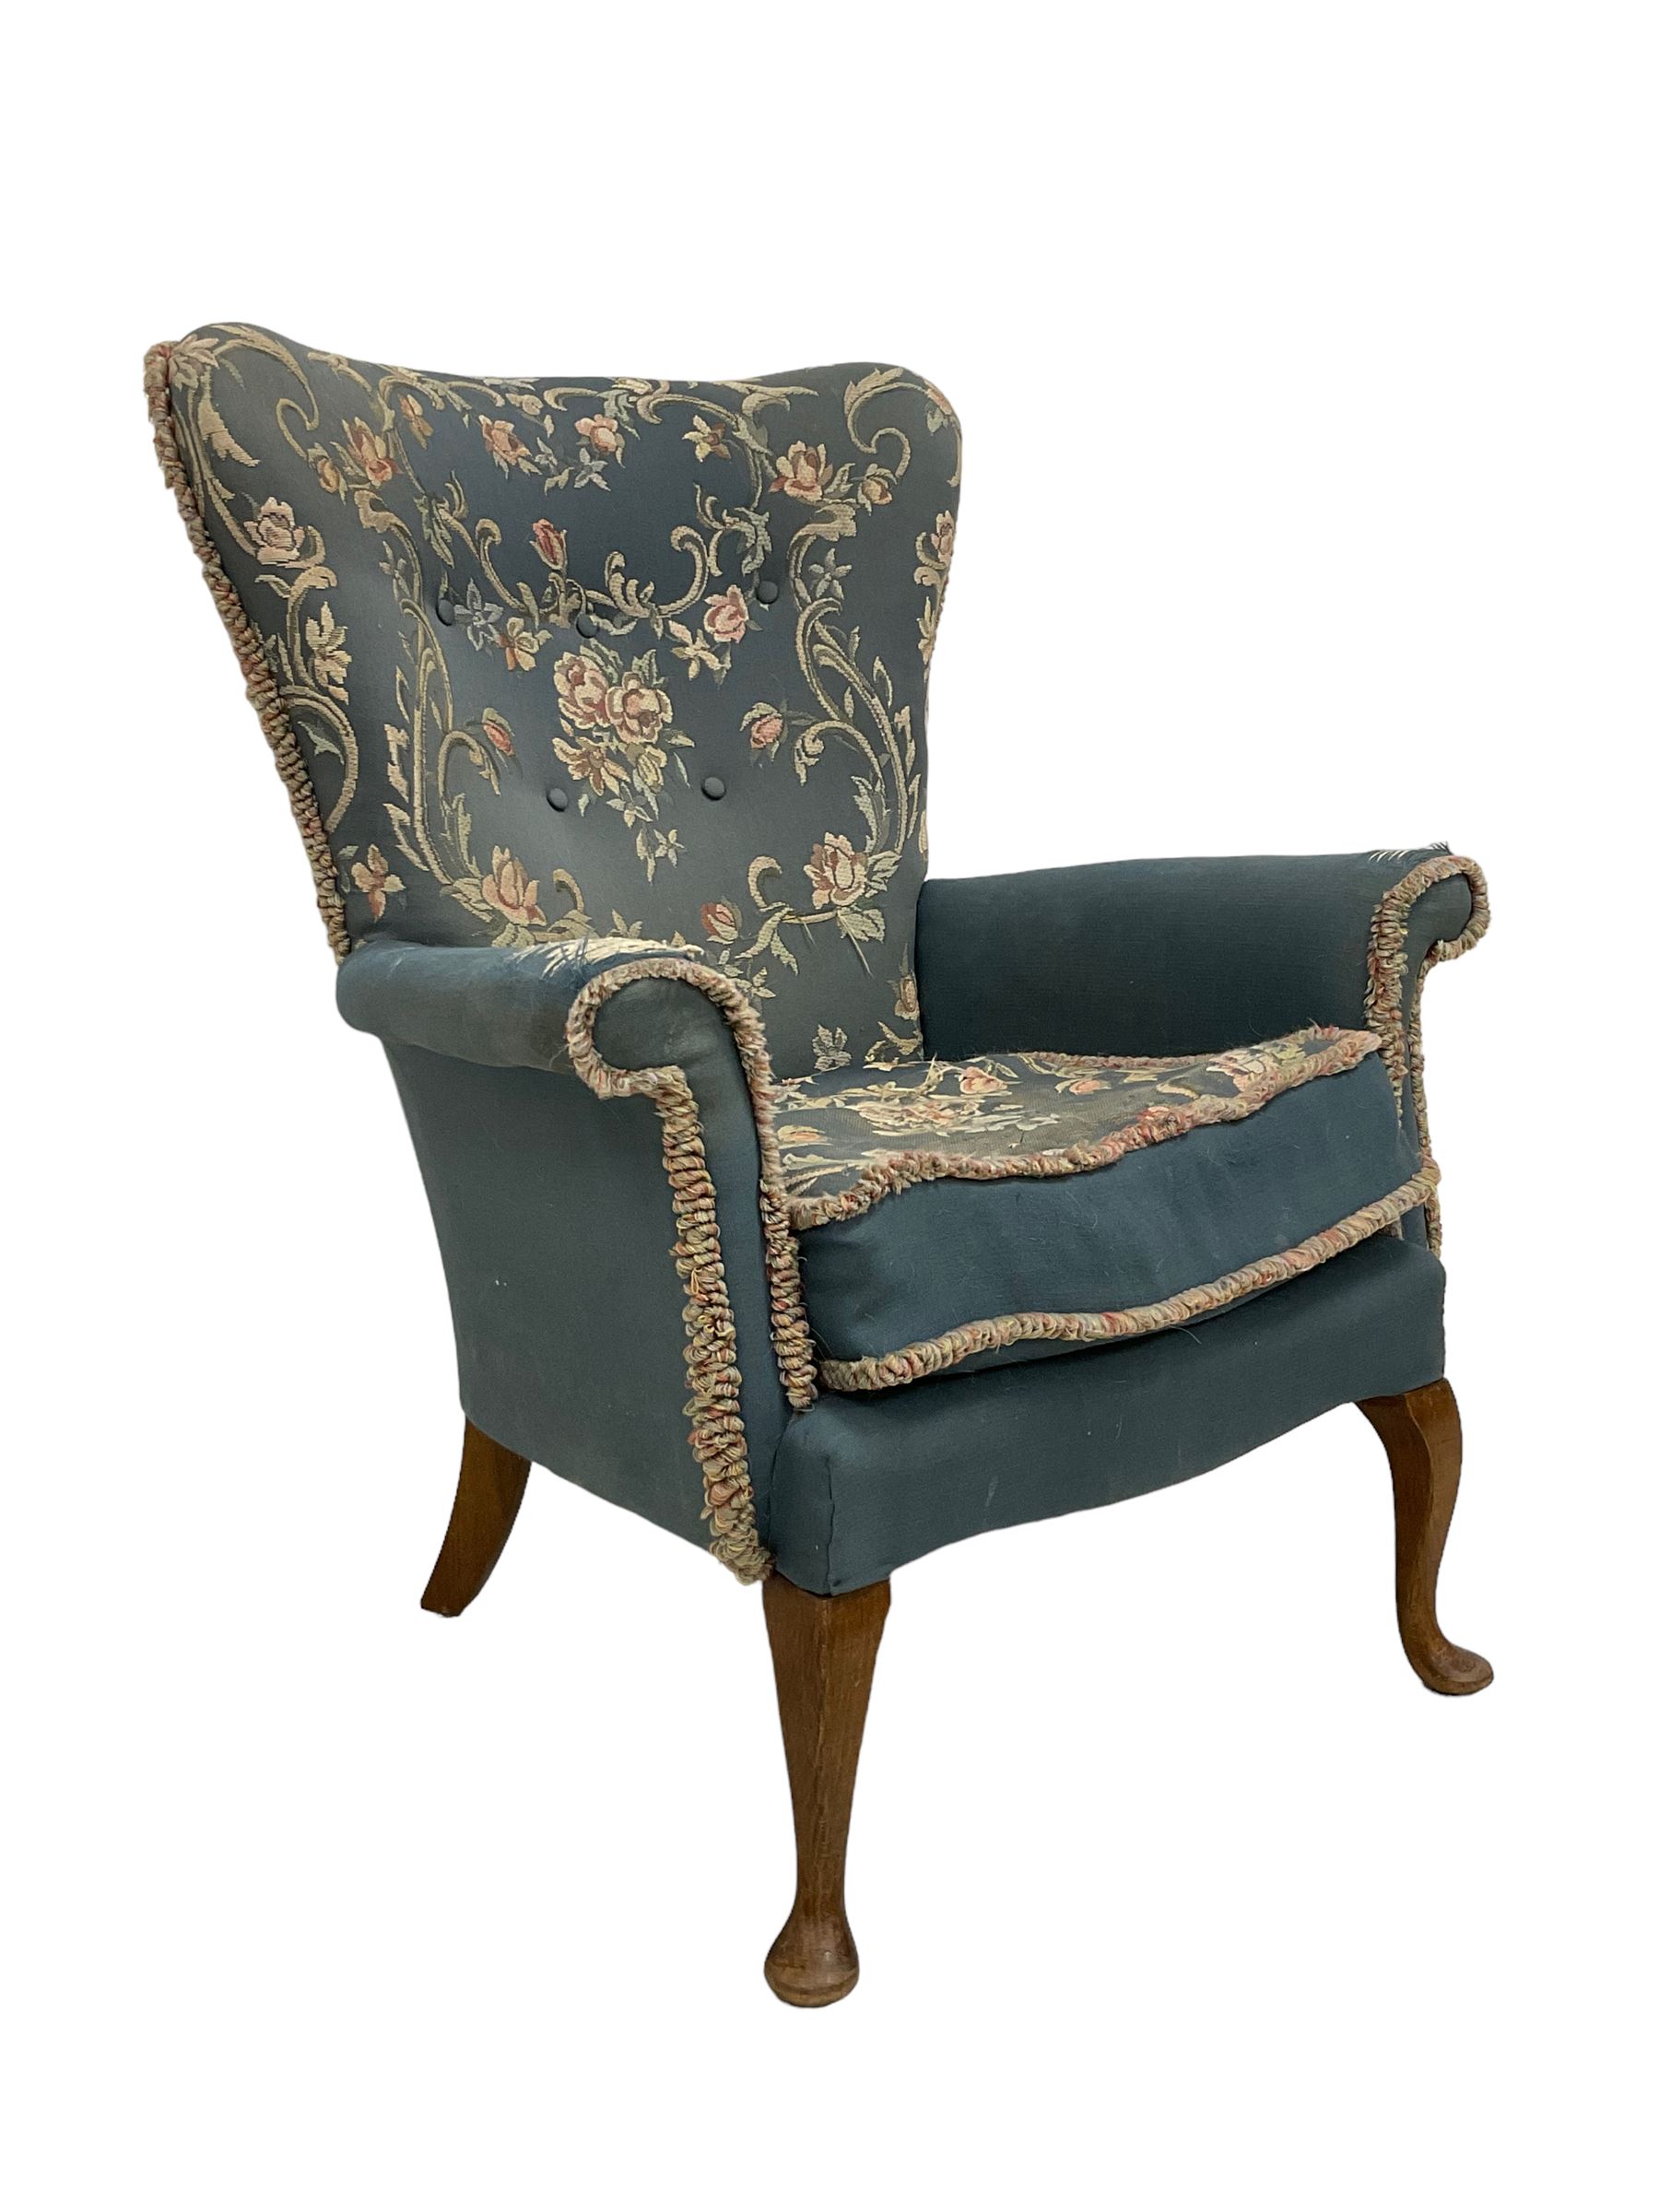 Early 20th century Queen Anne design upholstered wingback armchair - Image 3 of 4